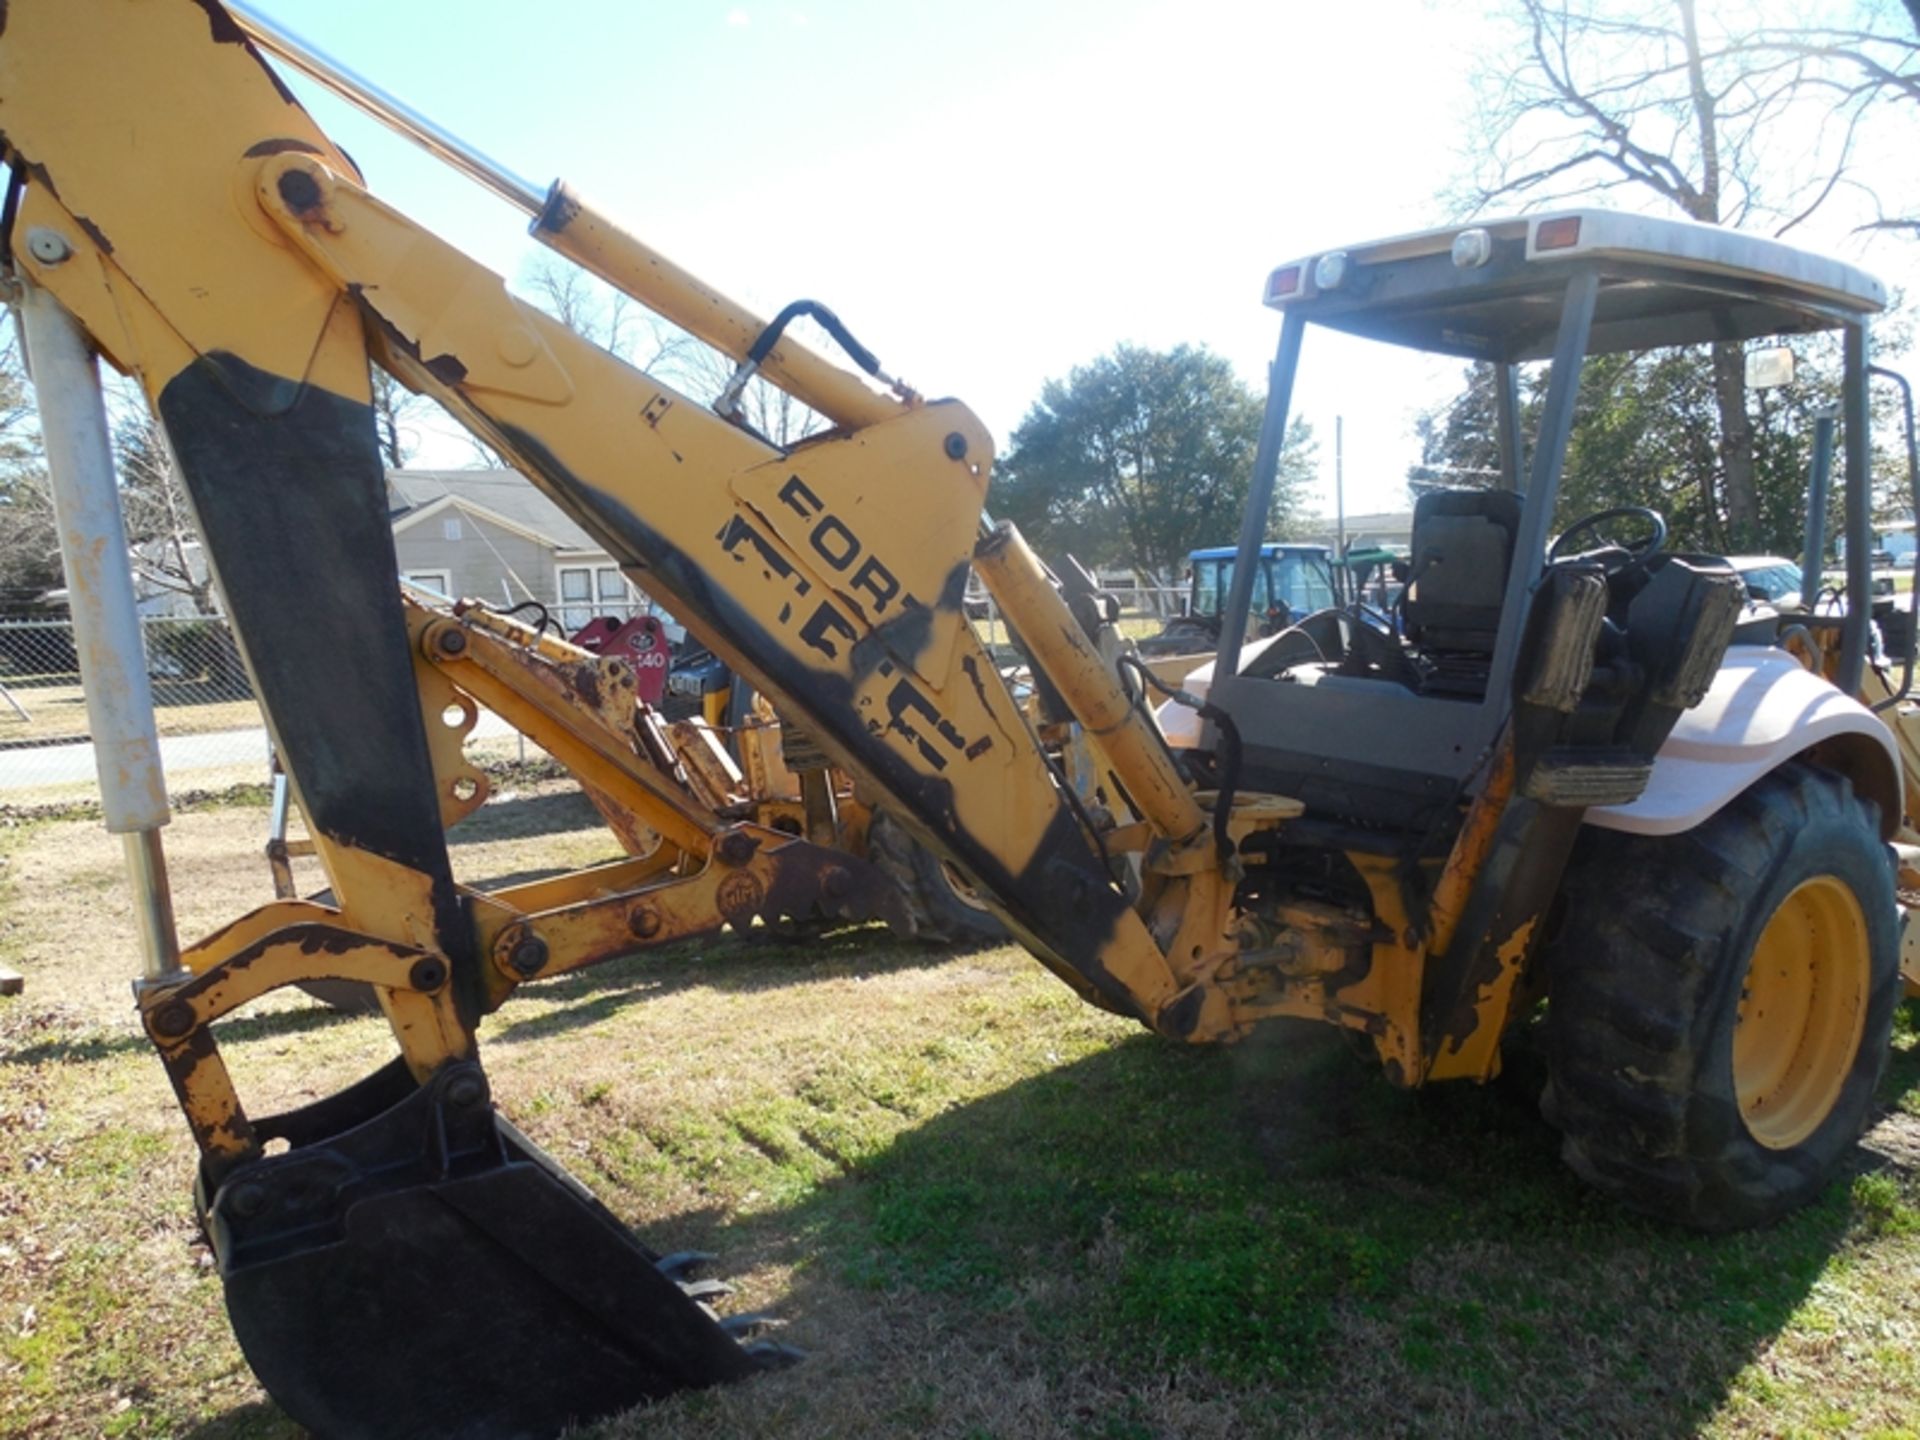 NEW HOLLAND 555E backhoe/loader, 2WD, thumb, ONLY 772 hrs., comes with complete manuals, paint & - Image 3 of 4